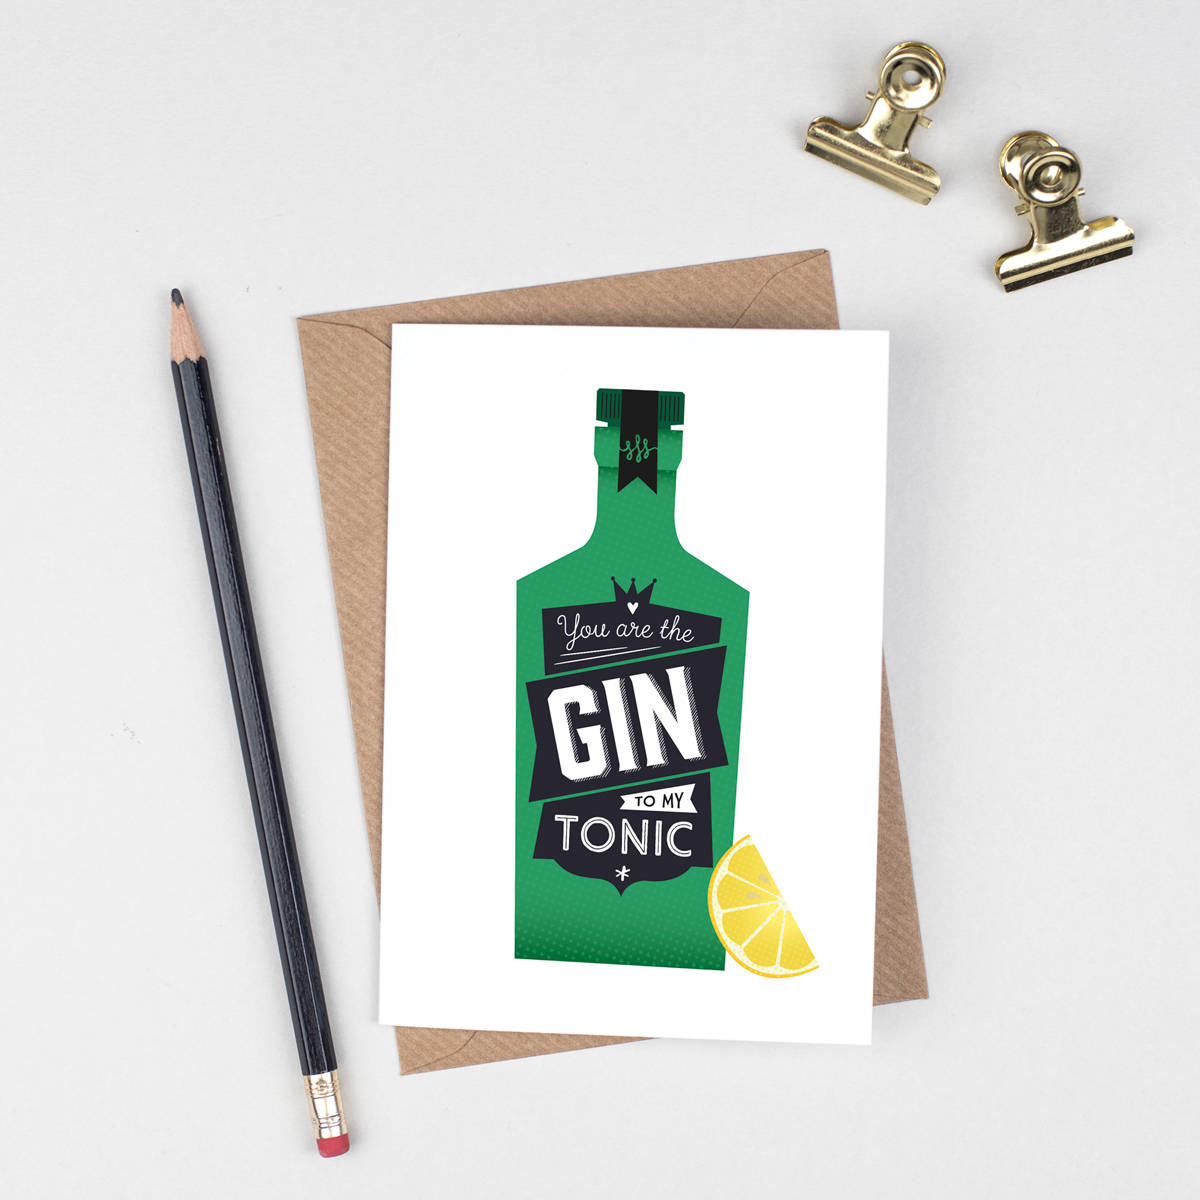 Gin Valentine's Card, Gin to my Tonic Love Card, Funny Valentines Card, Retro Gin Lovers Card, Card for Girlfriend, Anniversary Card